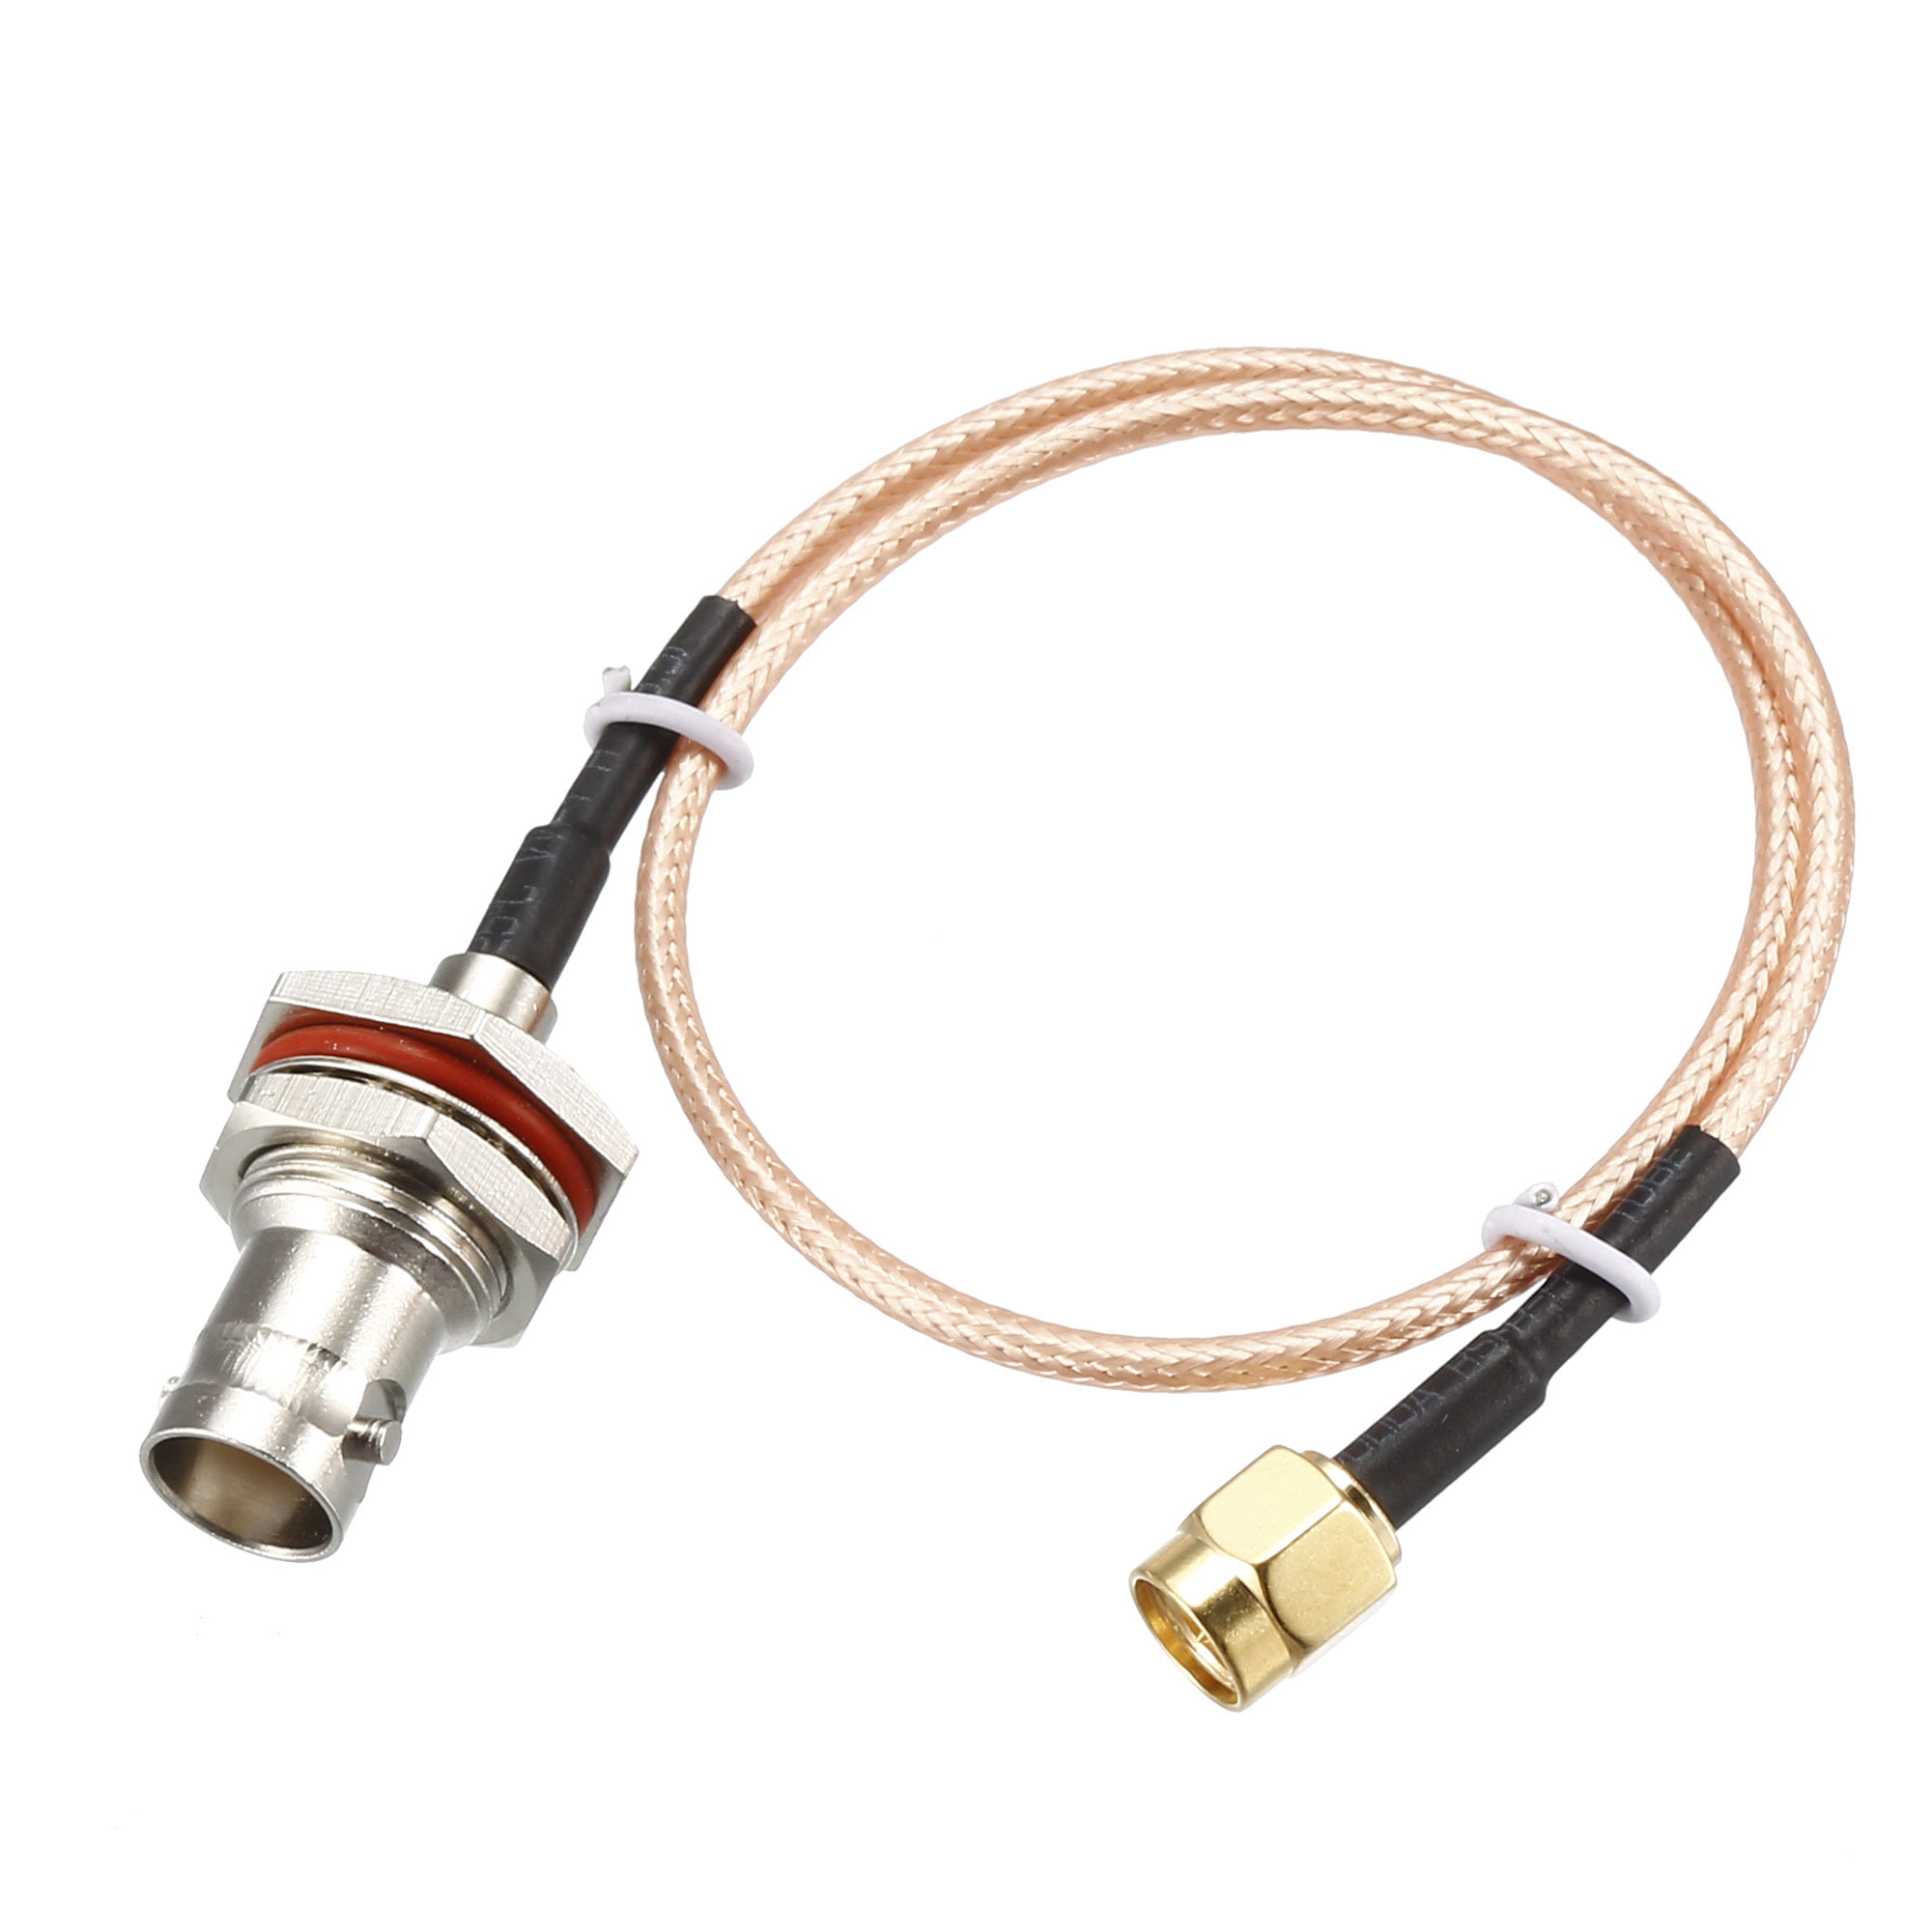 uxcell BNC Male to BNC Male Coax Cable RG316 RF Coaxial Cable 50 Ohm 0.5 Feet 2pcs for Video Signals,CCTV,DVR,Camera 